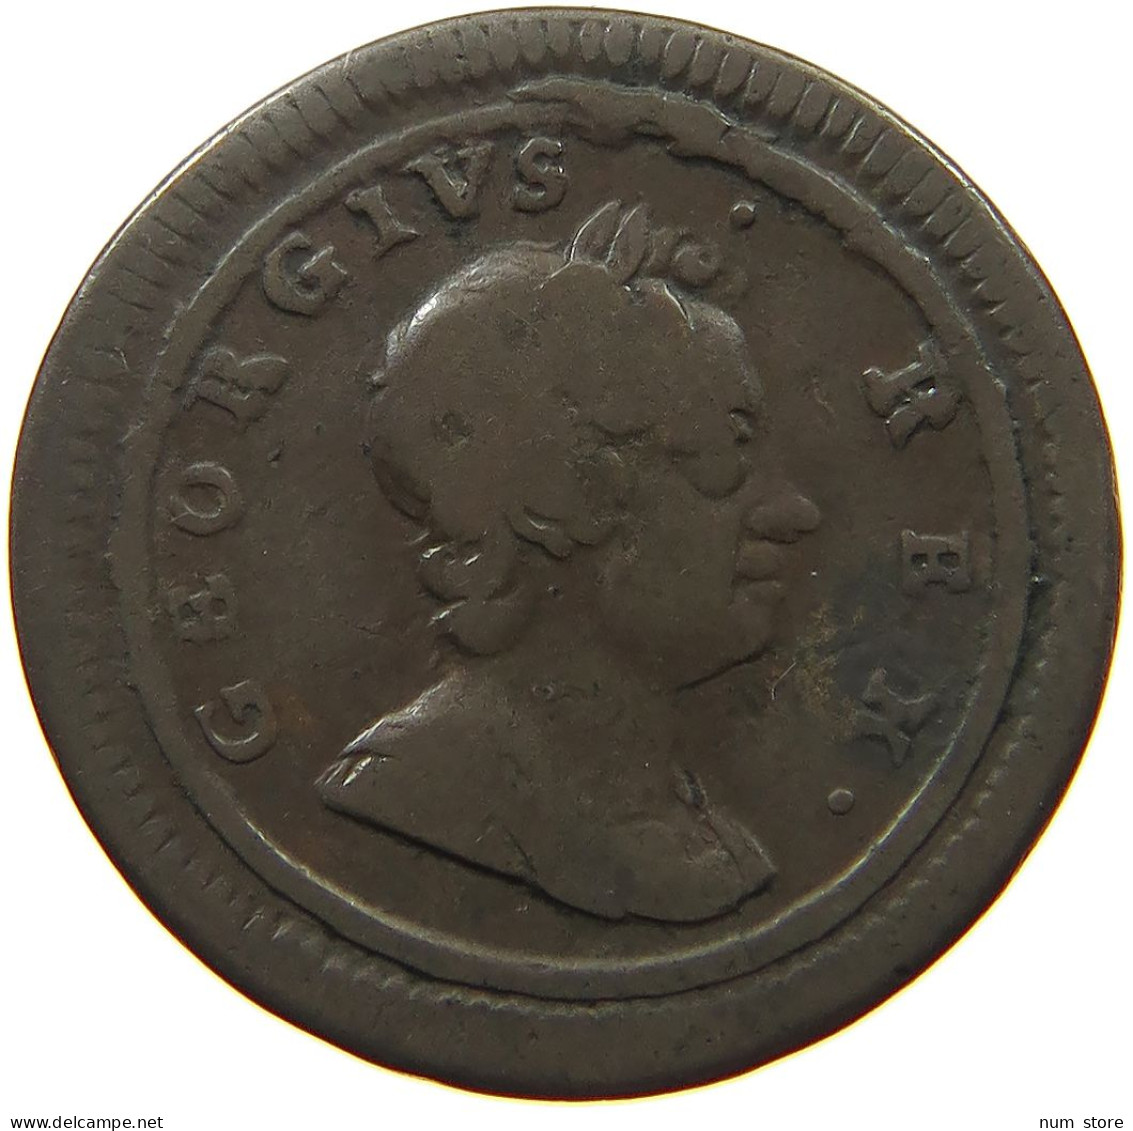 GREAT BRITAIN FARTHING 1719 George I. (1714-1727) #t149 0199 - A. 1 Farthing